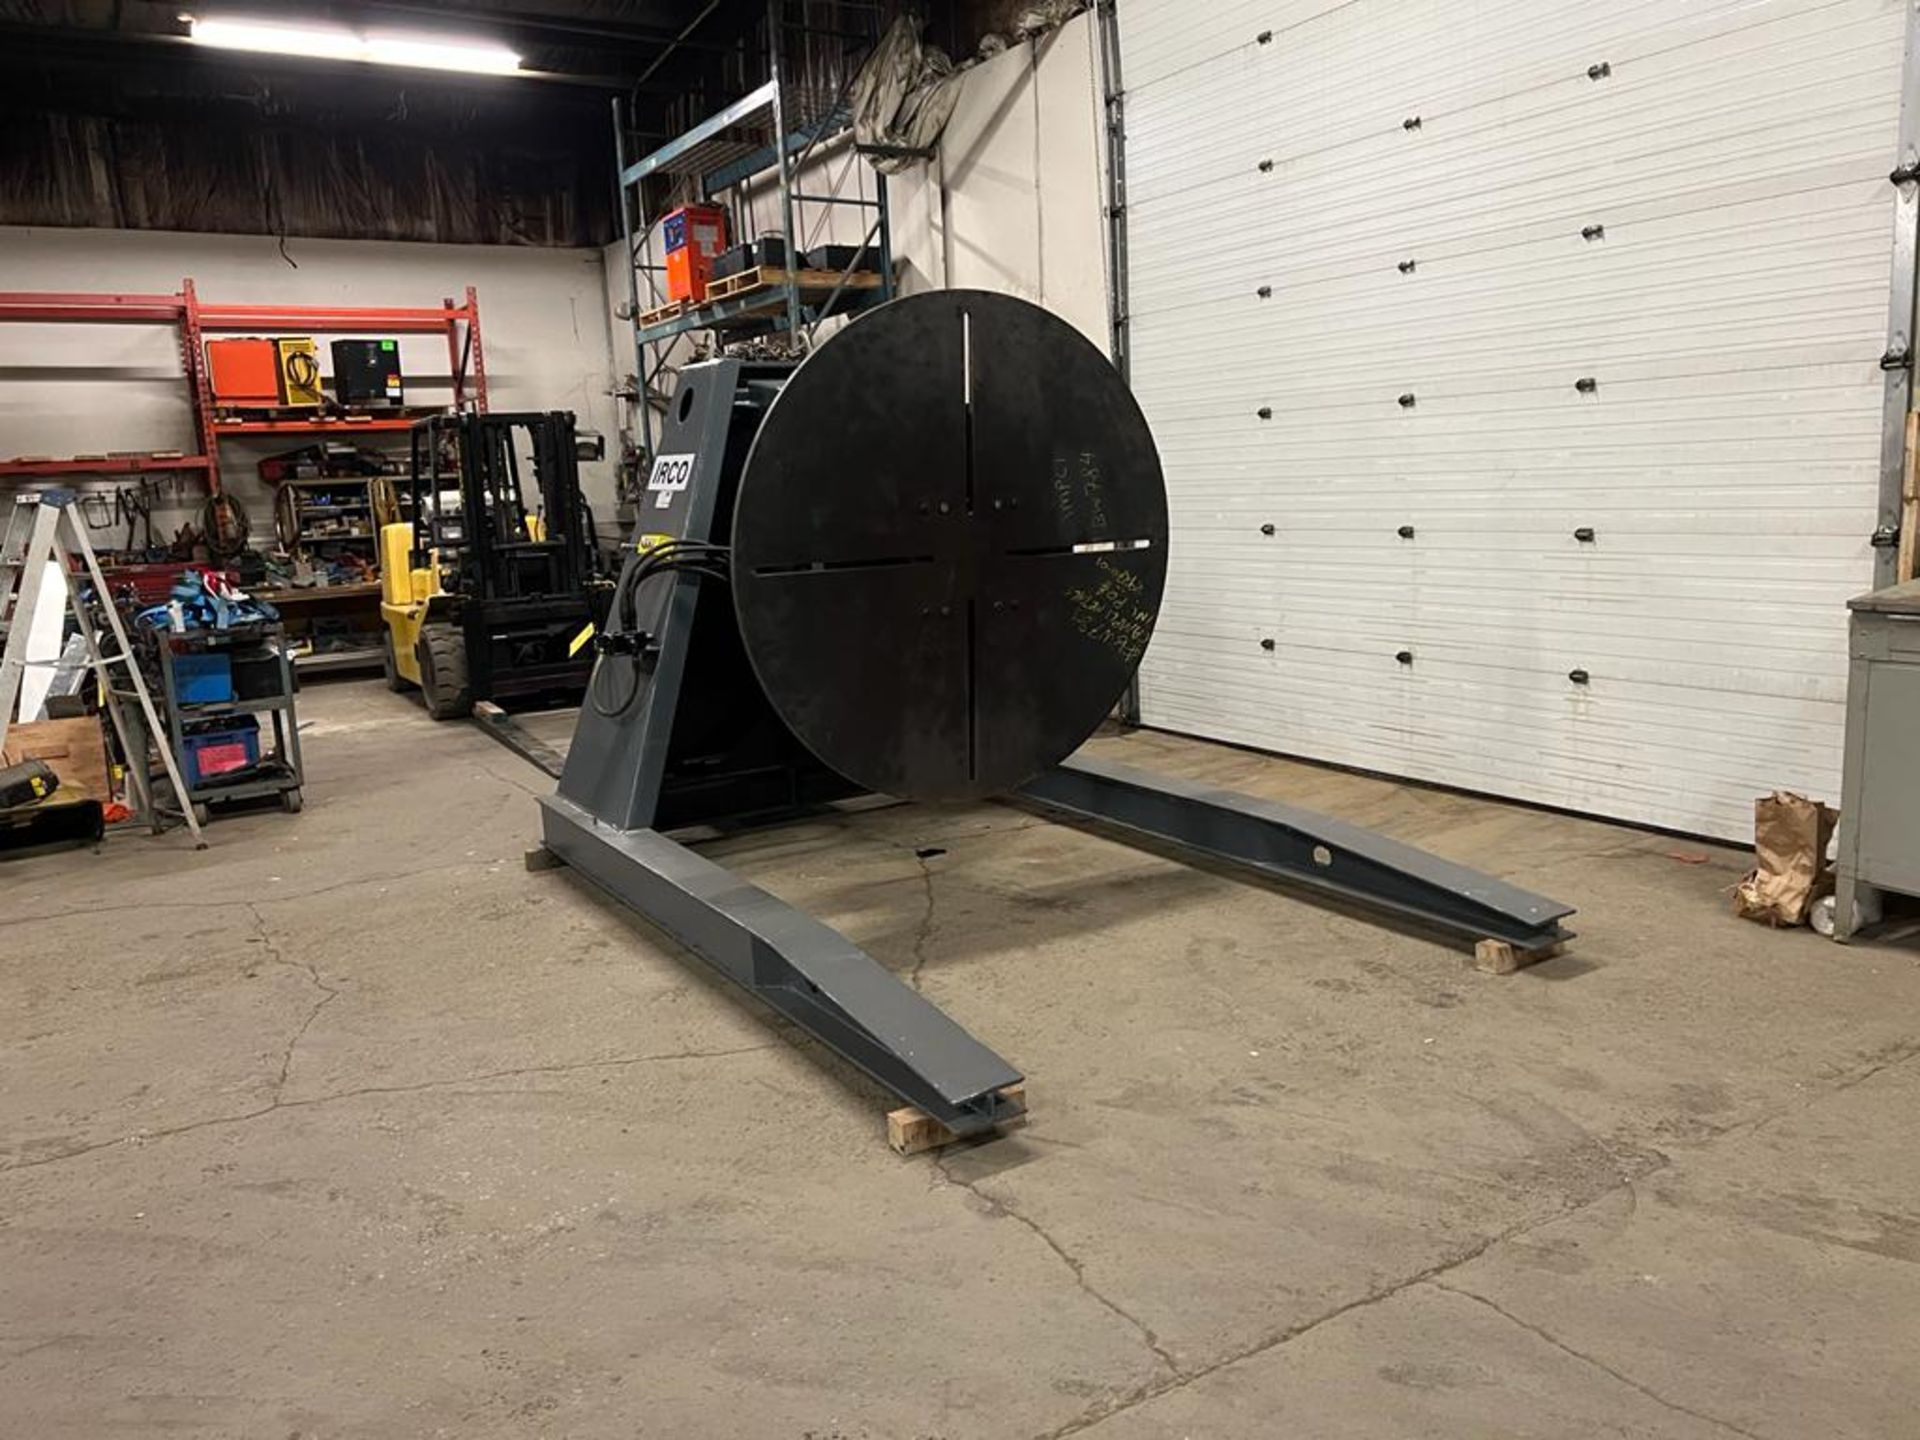 IRCO 16,000lbs Capacity Welding Positioner TILT and ROTATE model 6-16 with pendant controller - Image 5 of 5